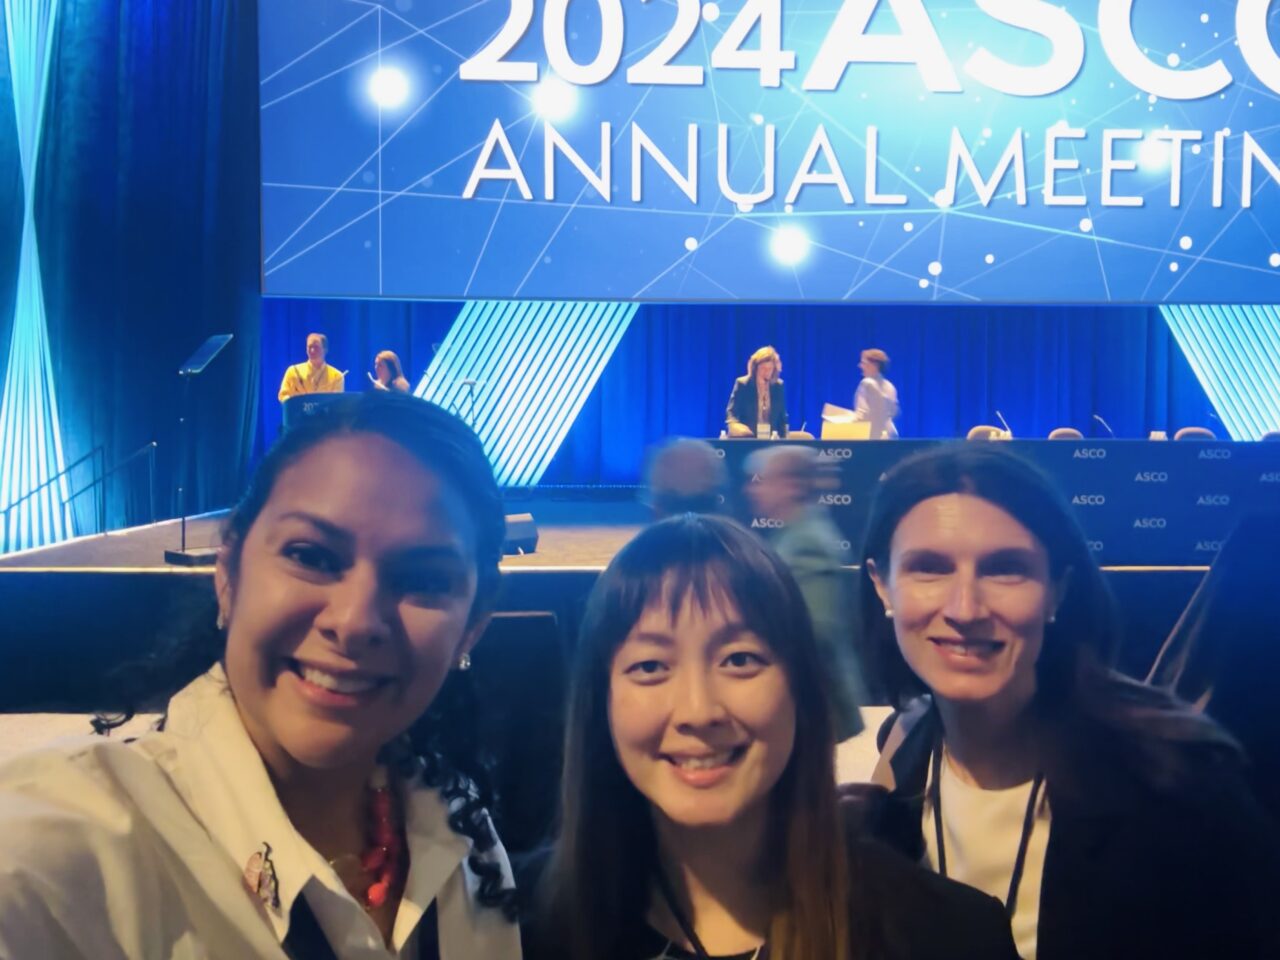 Jia Luo: Thankful for my smart and talented colleagues who gave brilliant talks at ASCO24